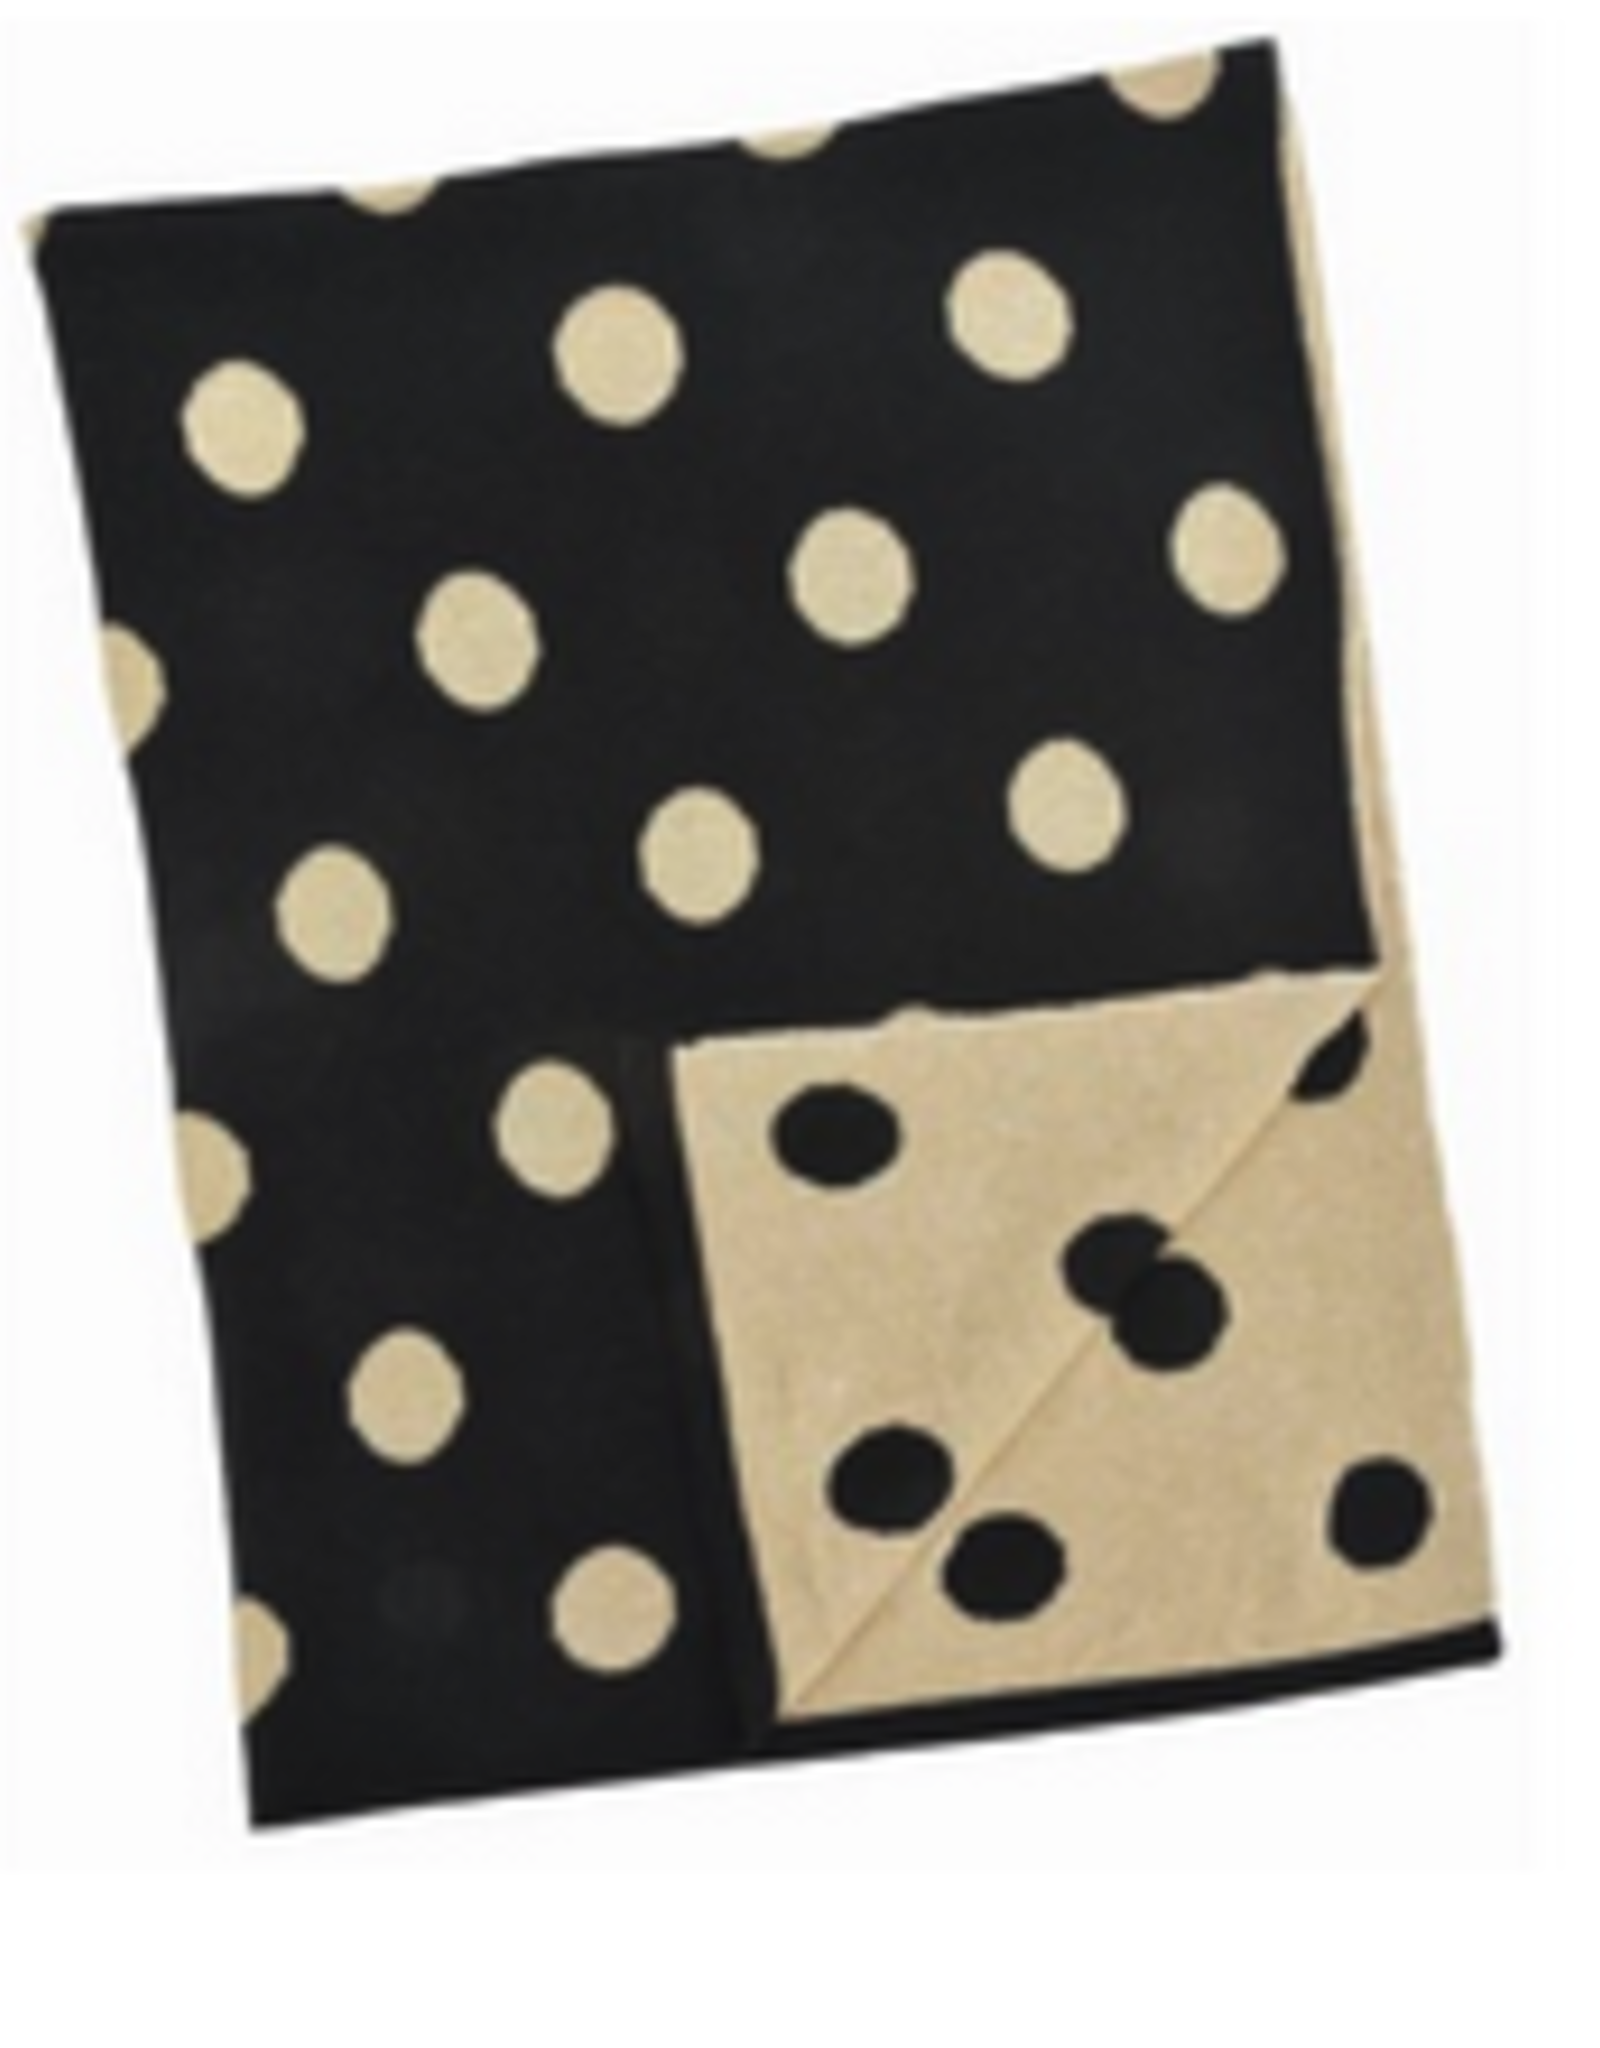 Black and Gold Cotton Polka Dot Baby Blanket L30" W40"